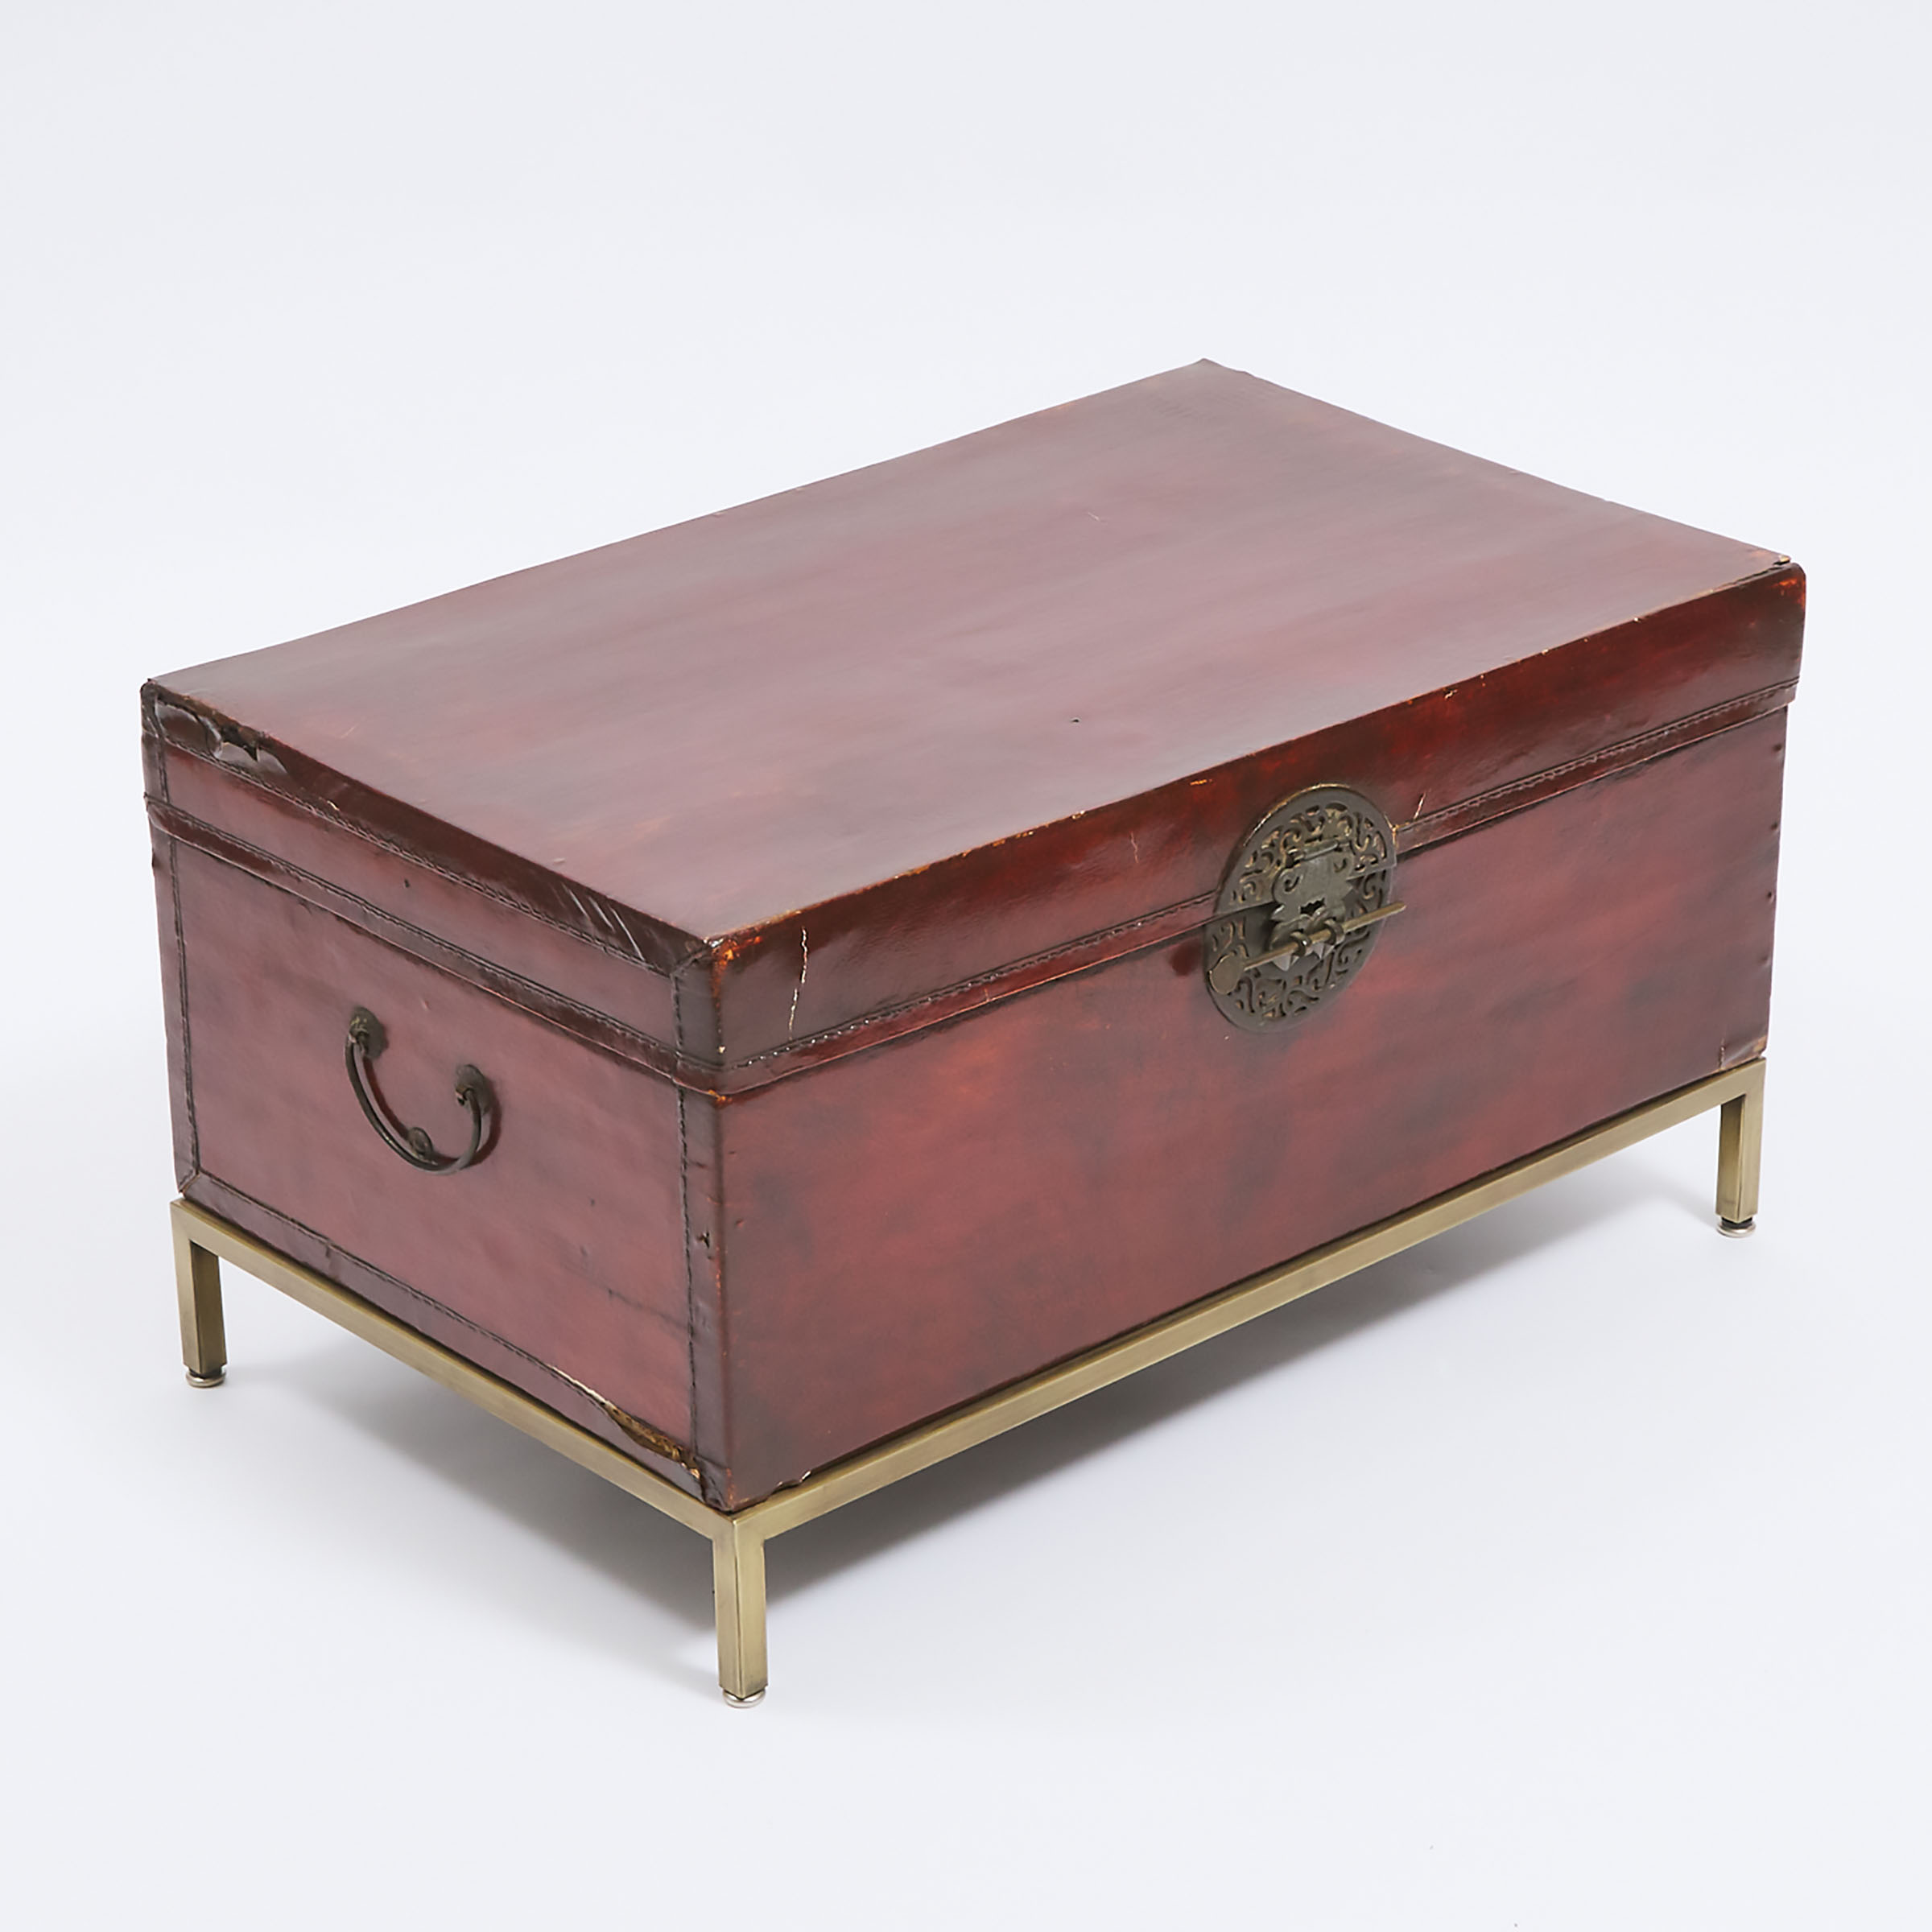 A Chinese Red Lacquered Pigskin Leather Wrapped Wood Chest, Late 19th/Early 20th Century, 晚清 红漆皮箱, o